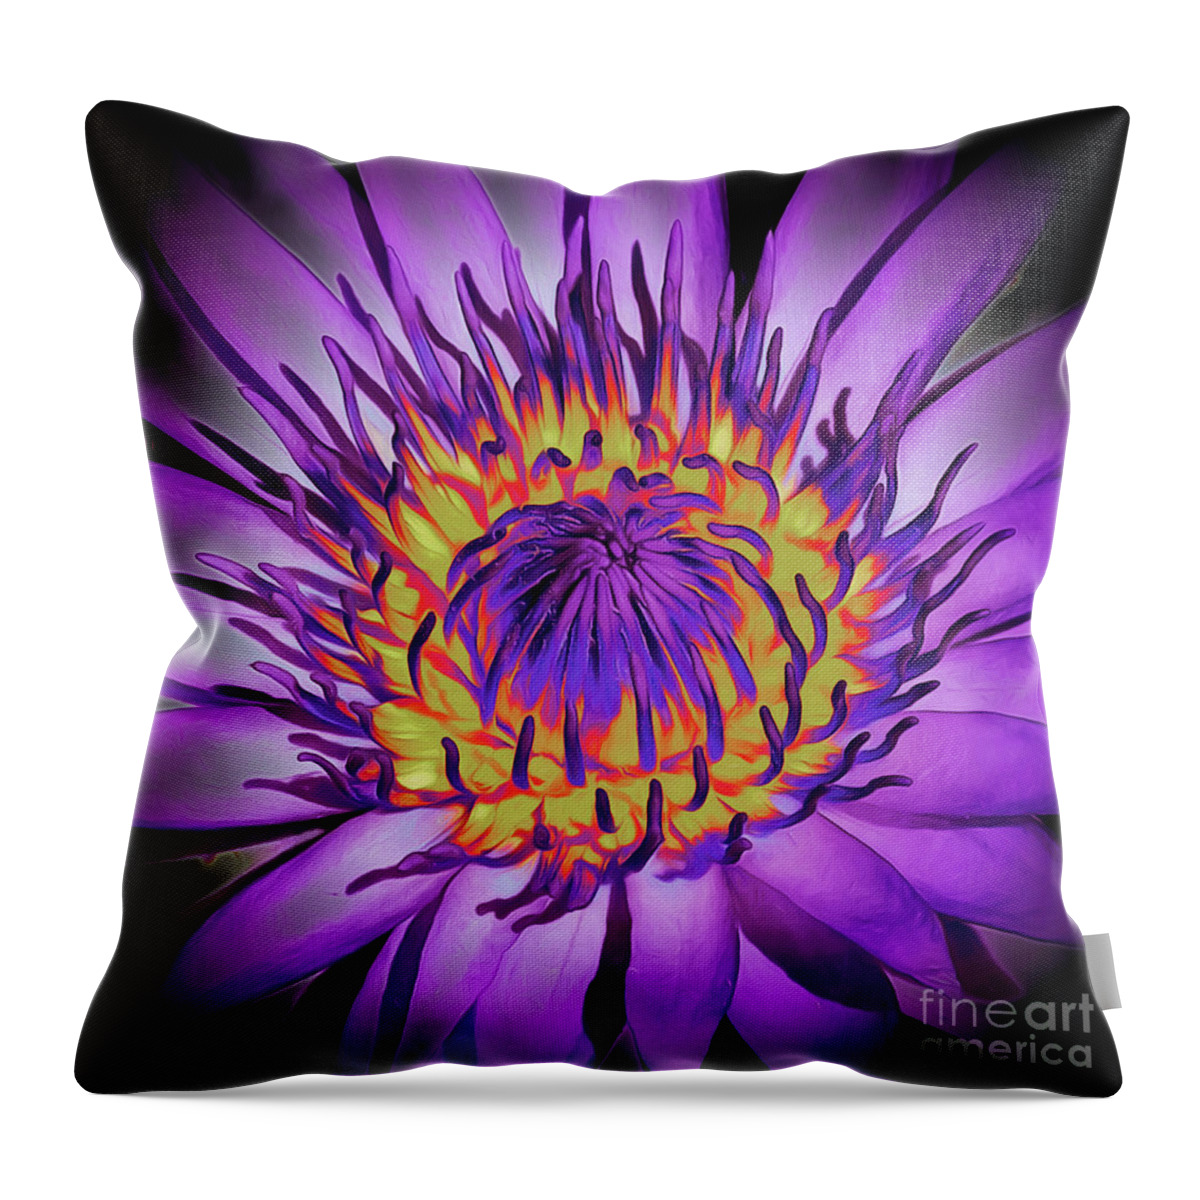 Lotus Flower Throw Pillow featuring the photograph Lotus Flower Blossom by Scott Cameron